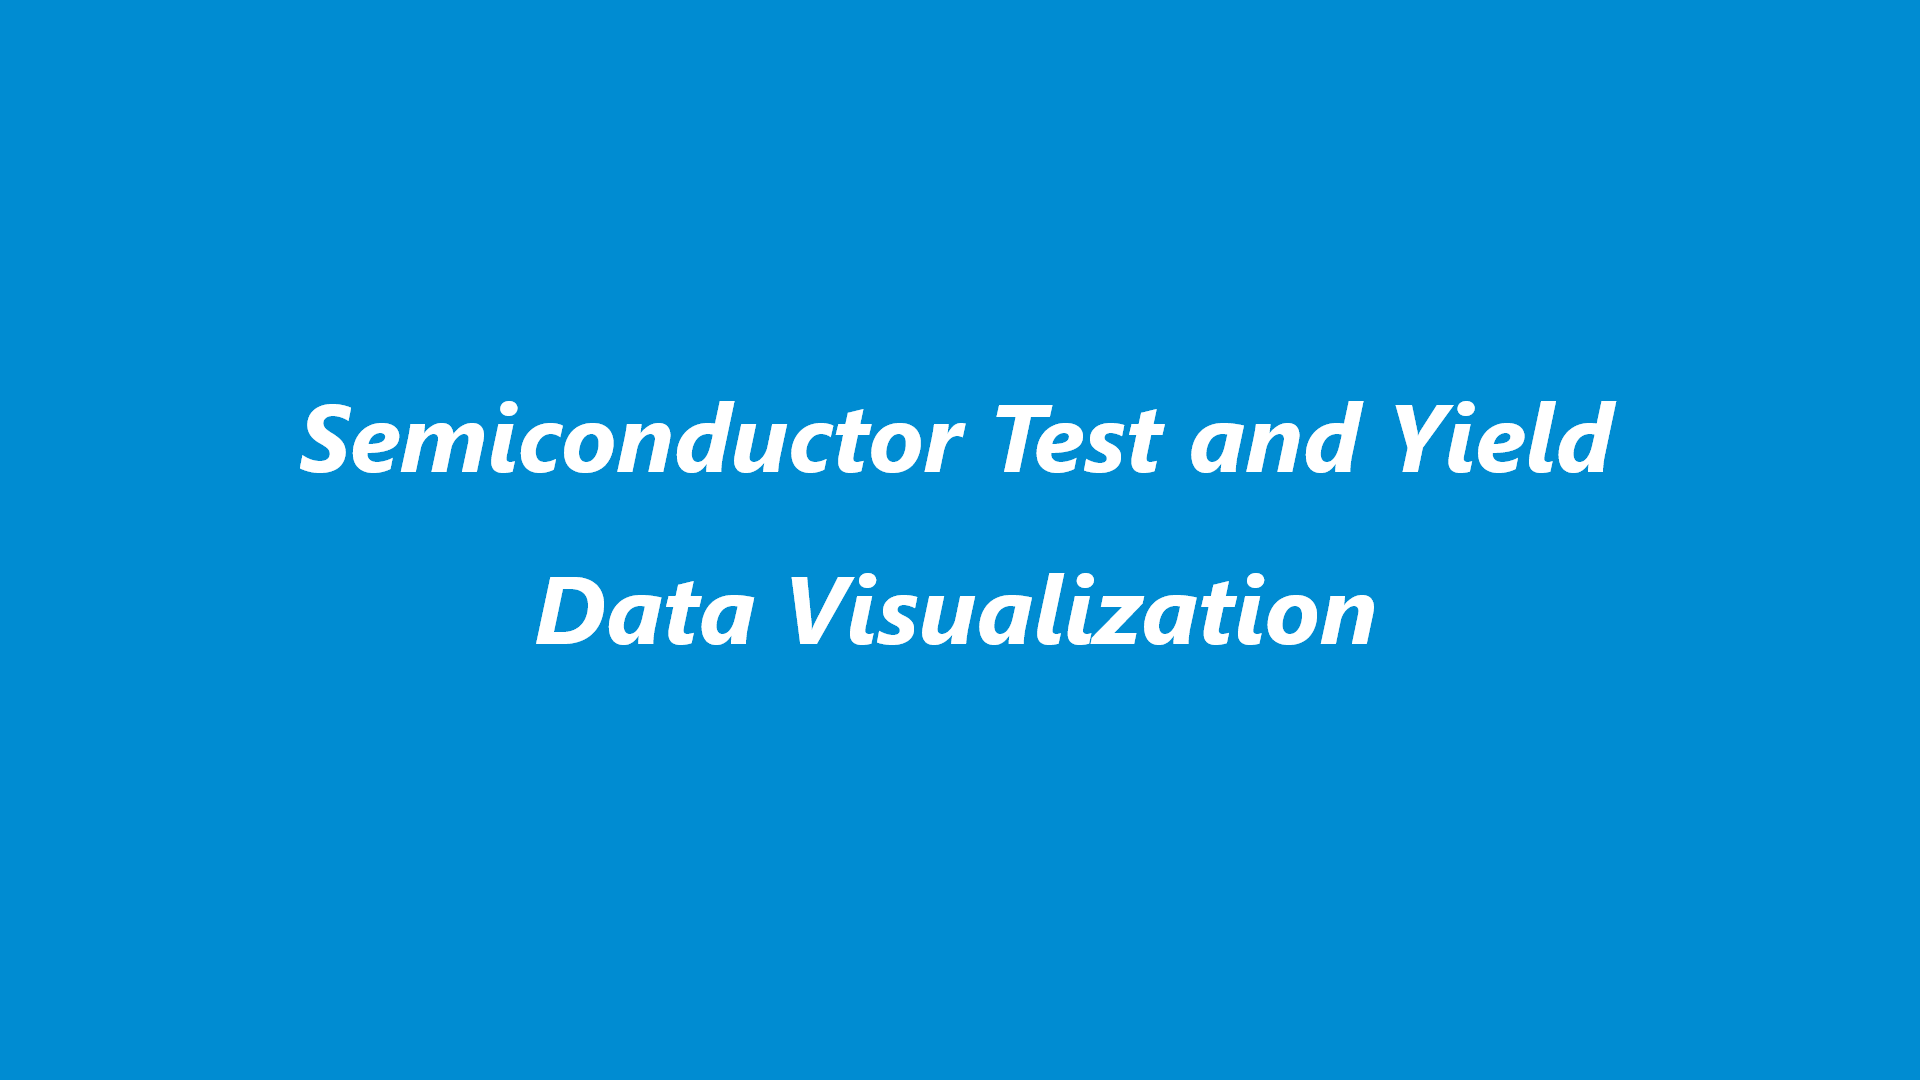 Semiconductor test and yield data visualization